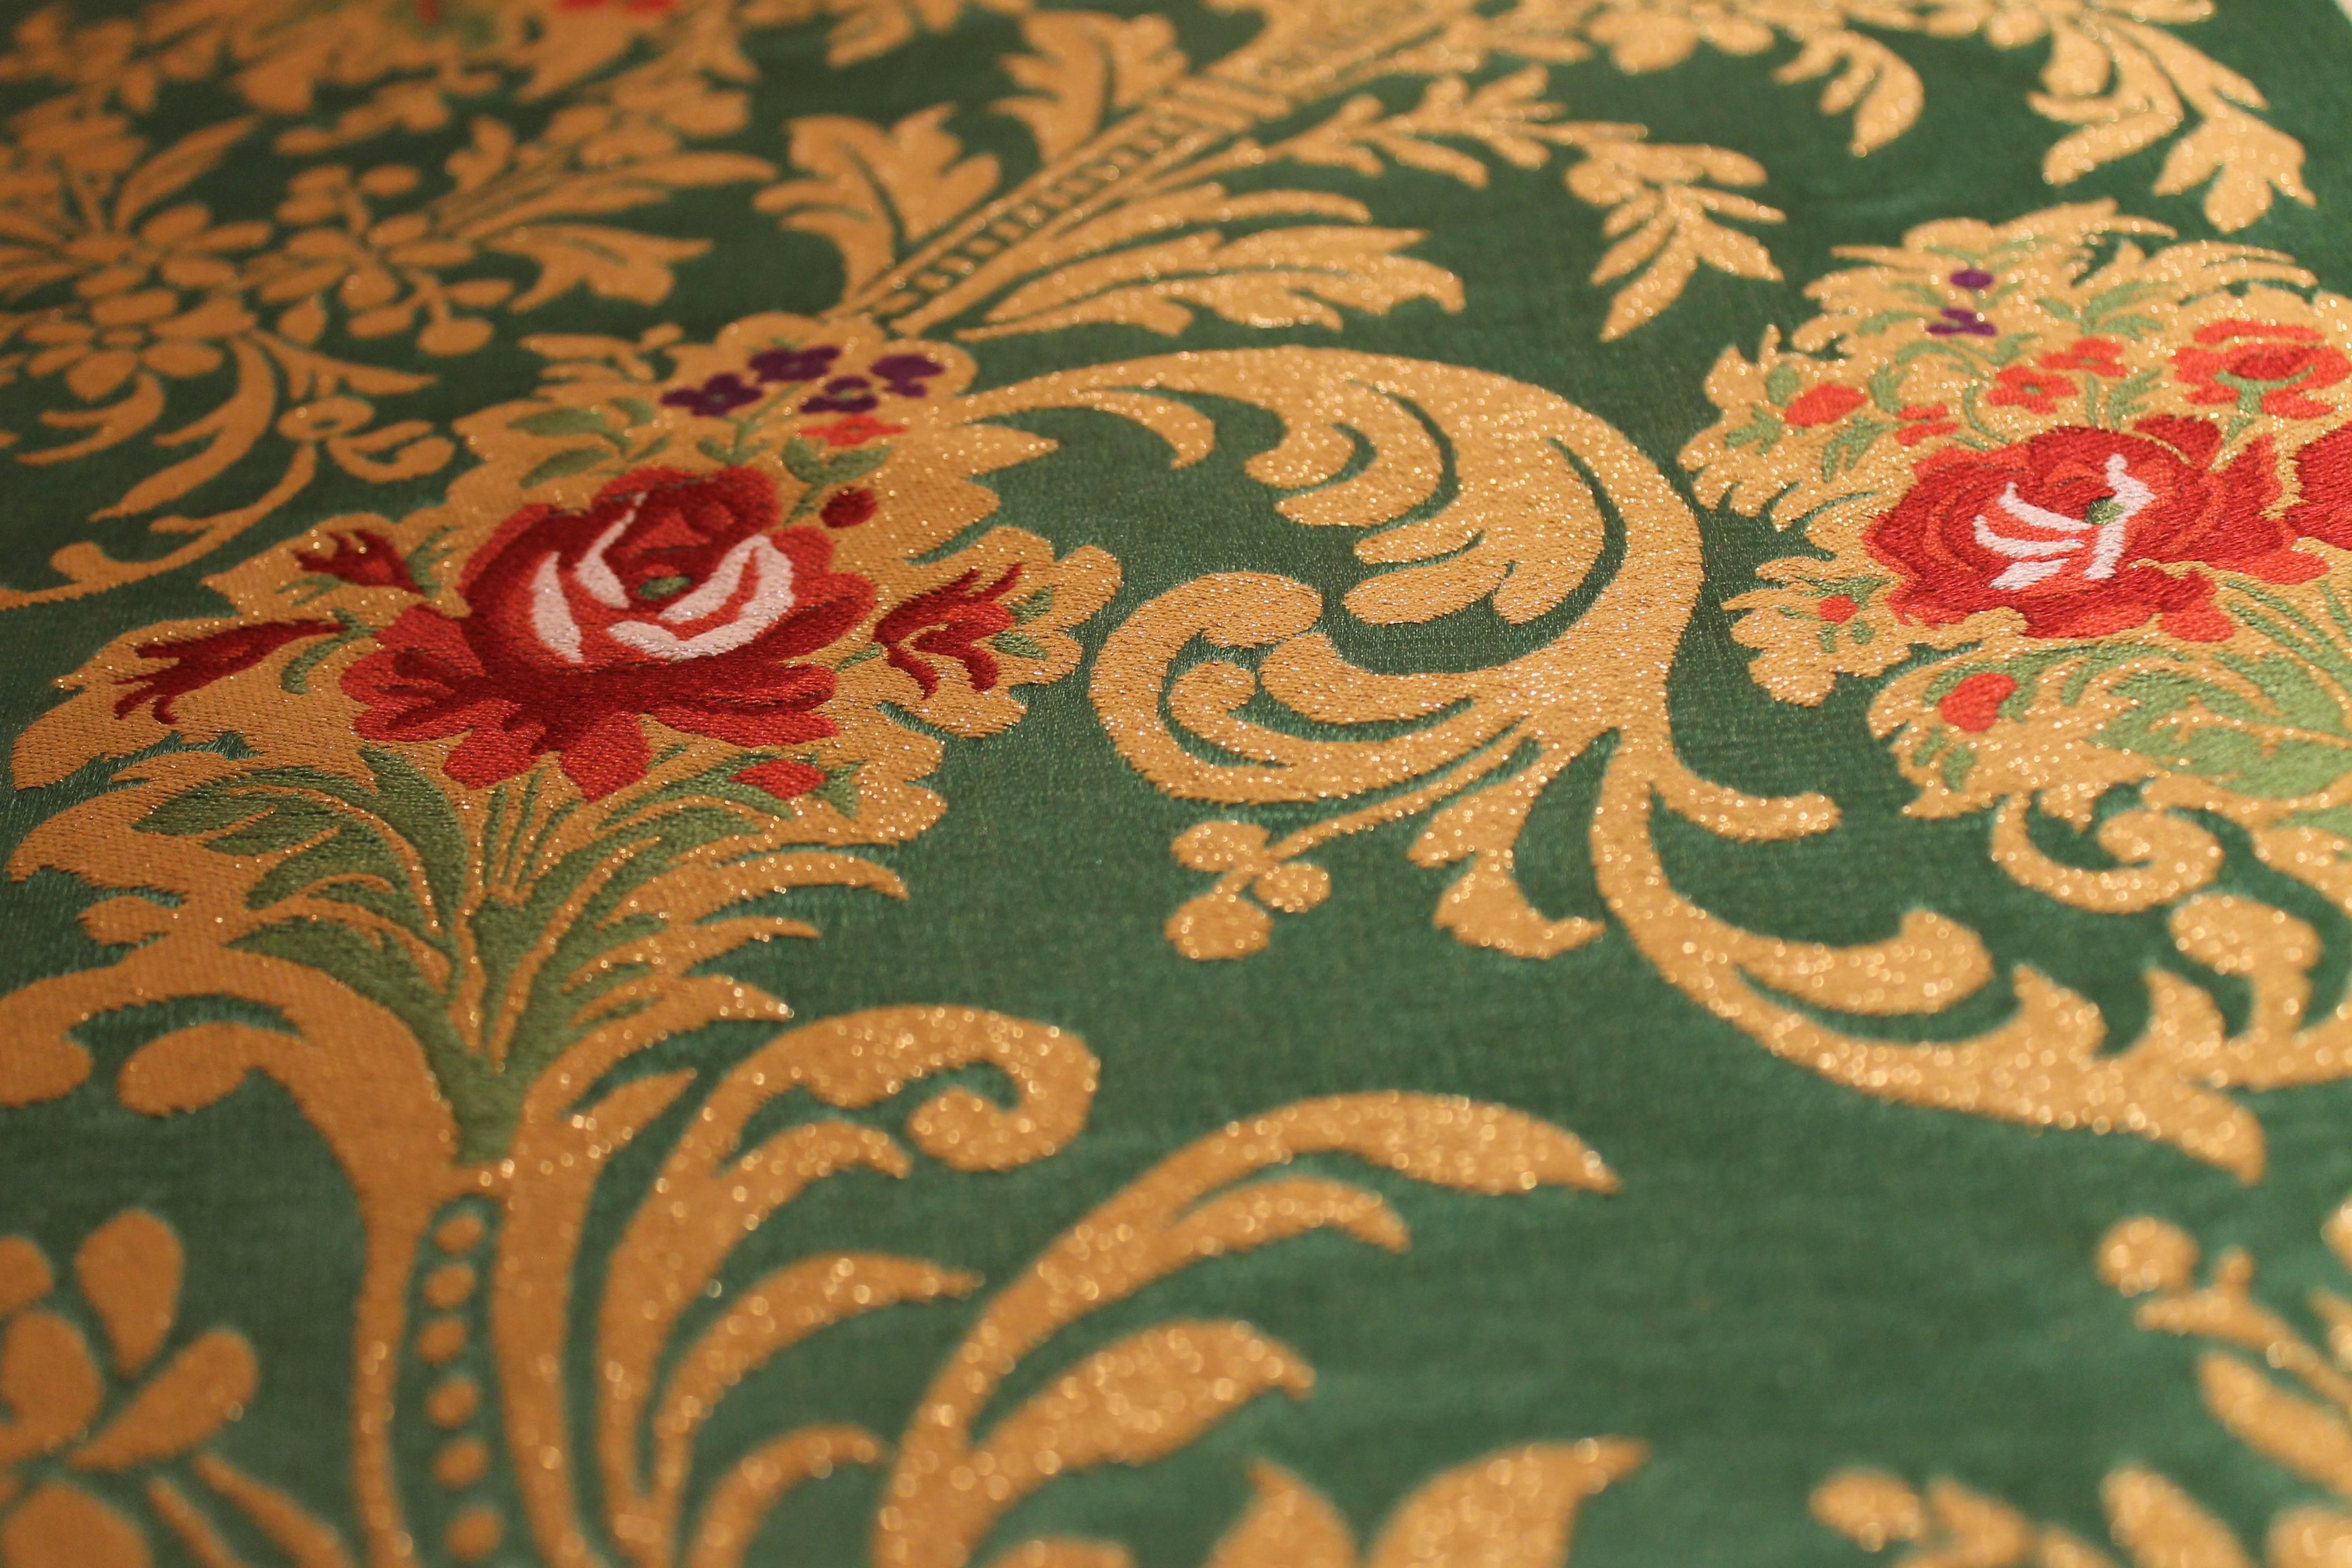 Italian Green Silk Blend Brocade Fabric with Red Roses and Gold Floral Patterns For Sale 10